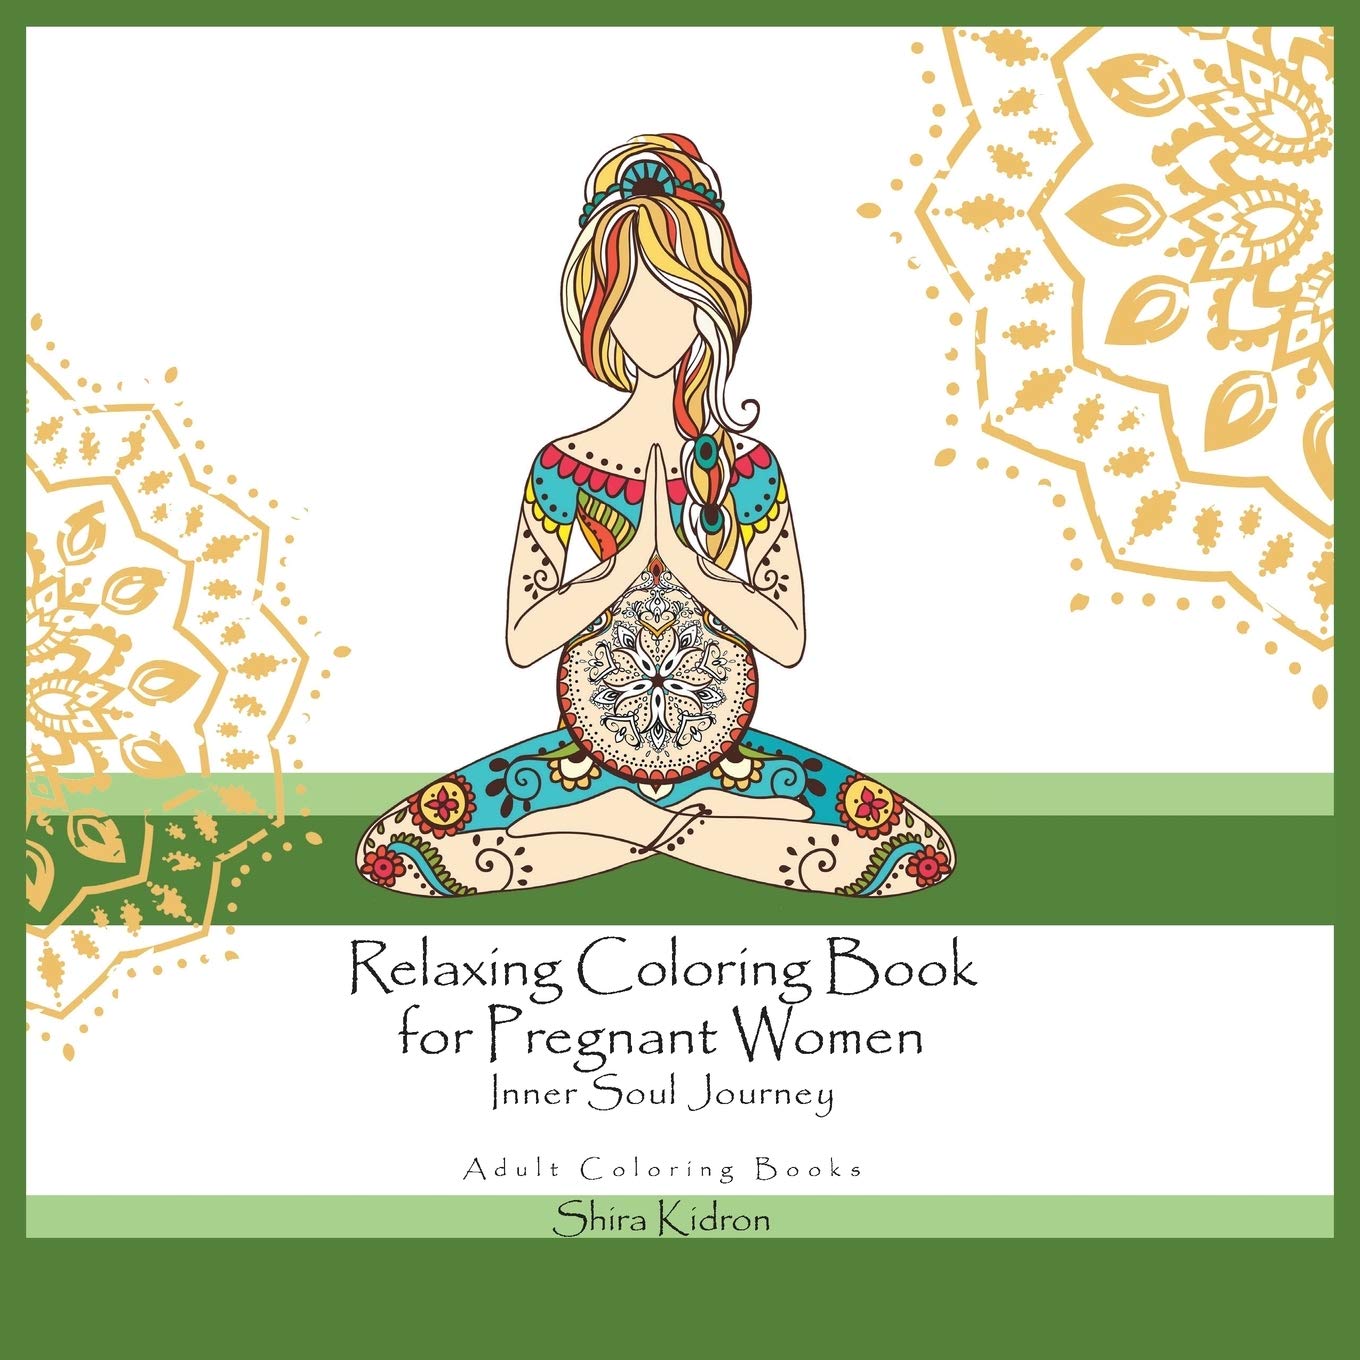 Adult Coloring Books- Relaxing Coloring Book For Pregnant Women